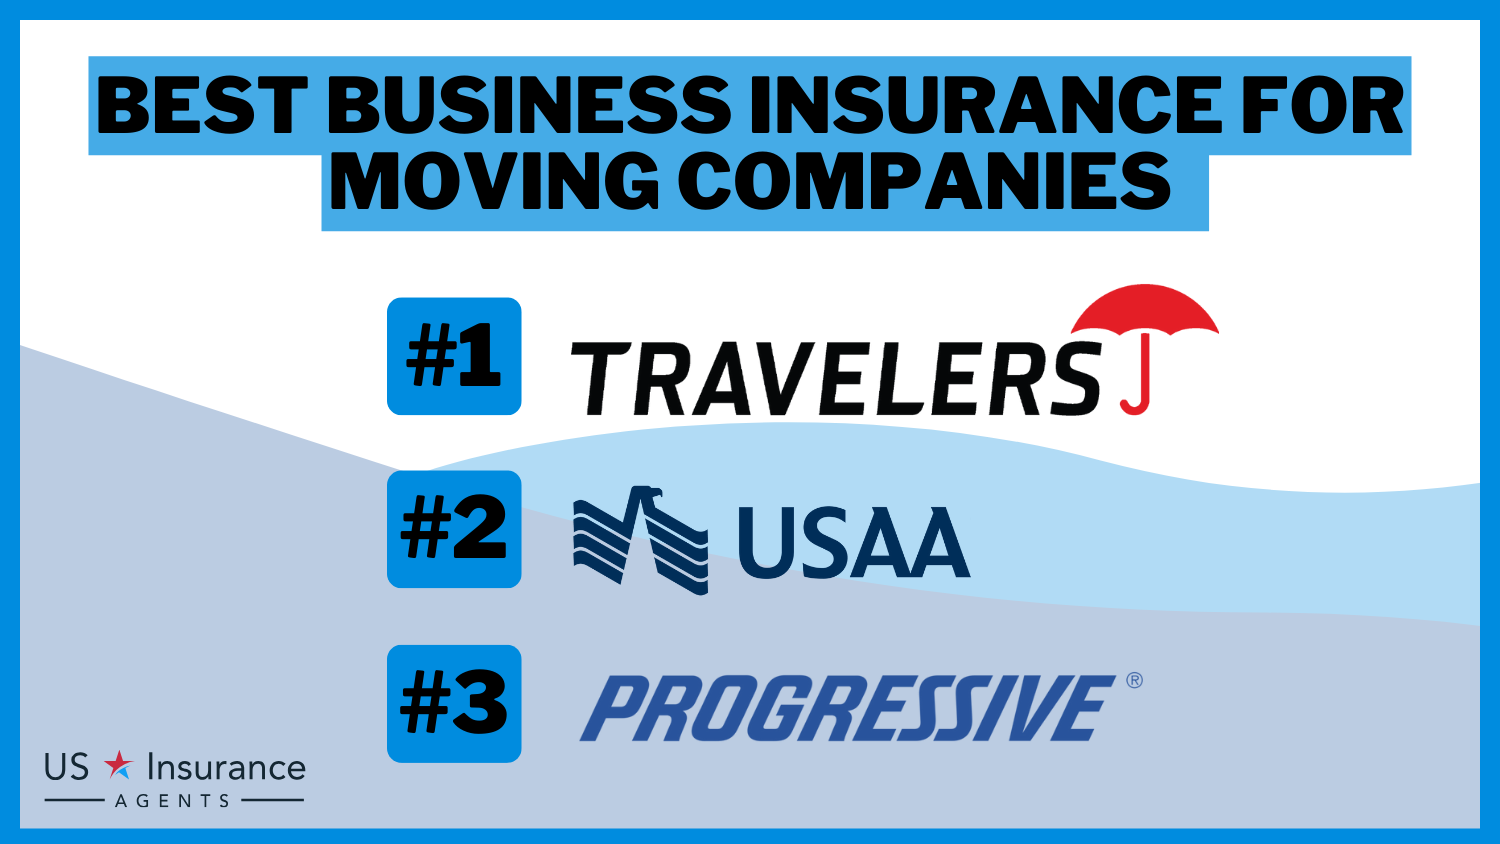 3 Best Business Insurance for Moving Companies: Travelers, USAA and Progressive.